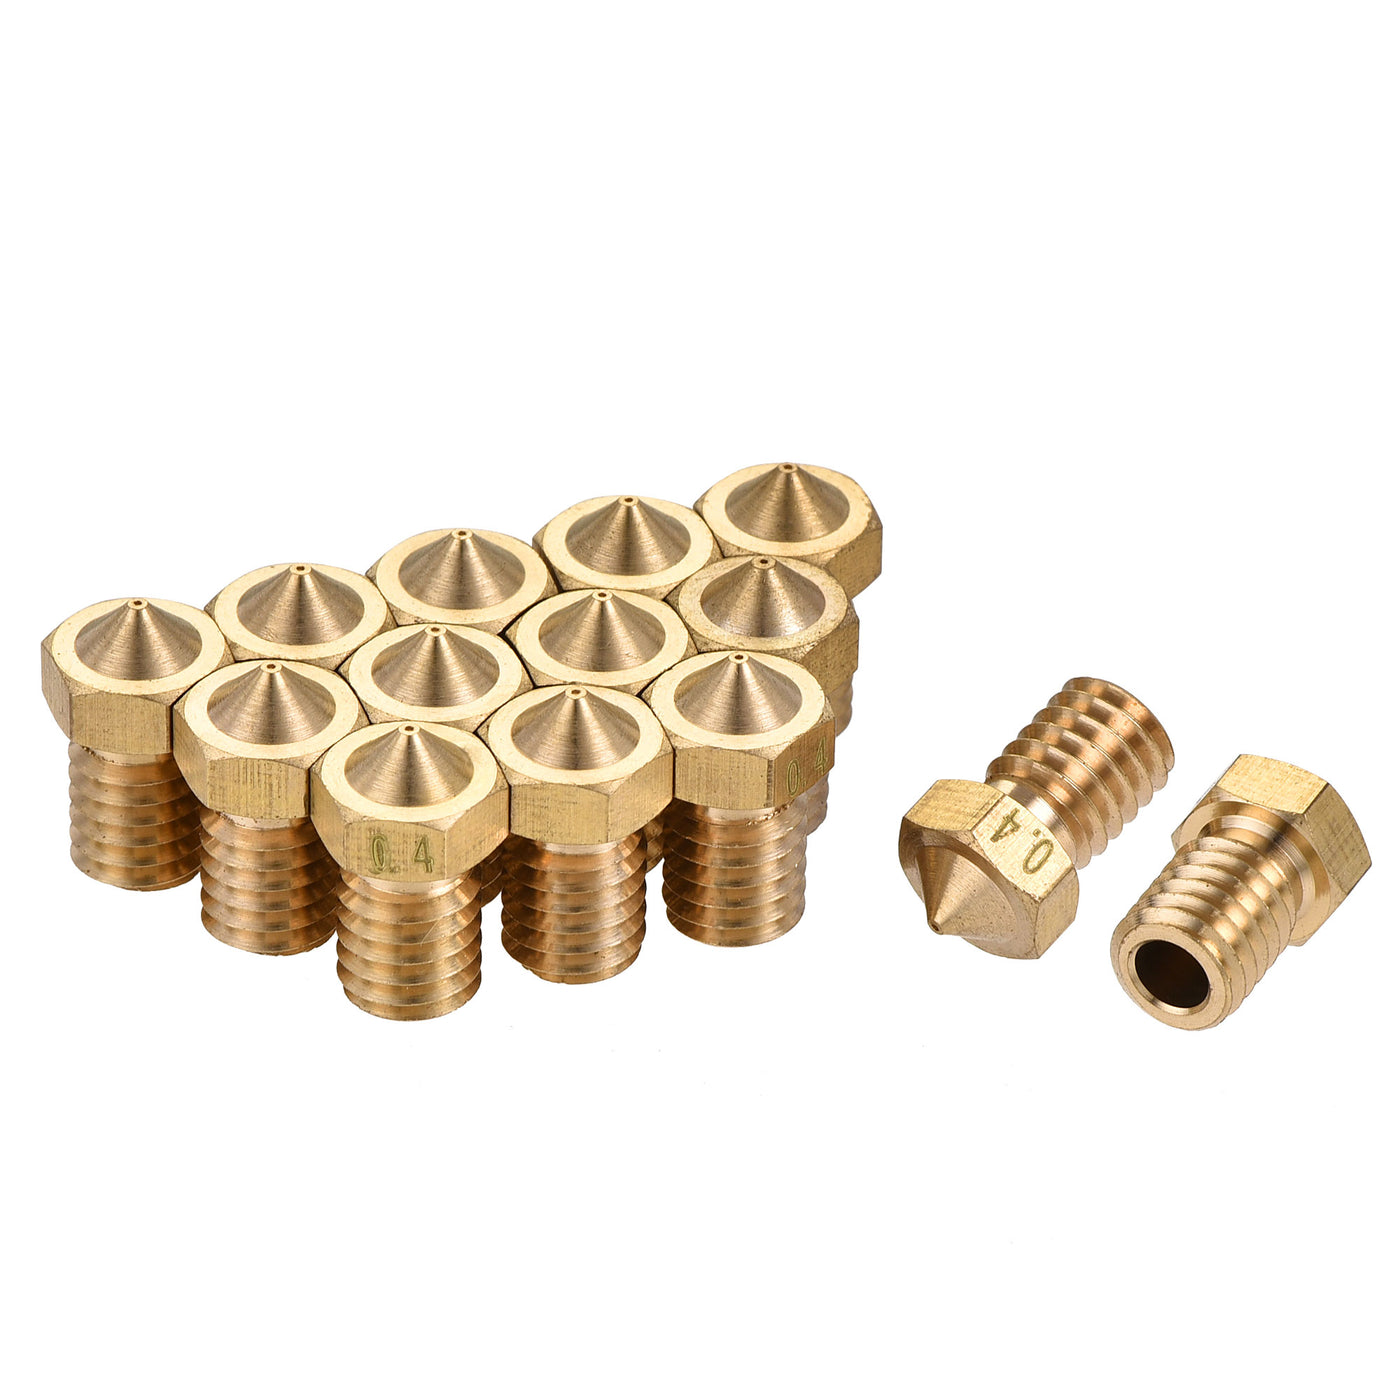 uxcell Uxcell 0.4mm 3D Printer Nozzle, 14pcs M6 Thread for V5 V6 3mm Extruder Print, Brass